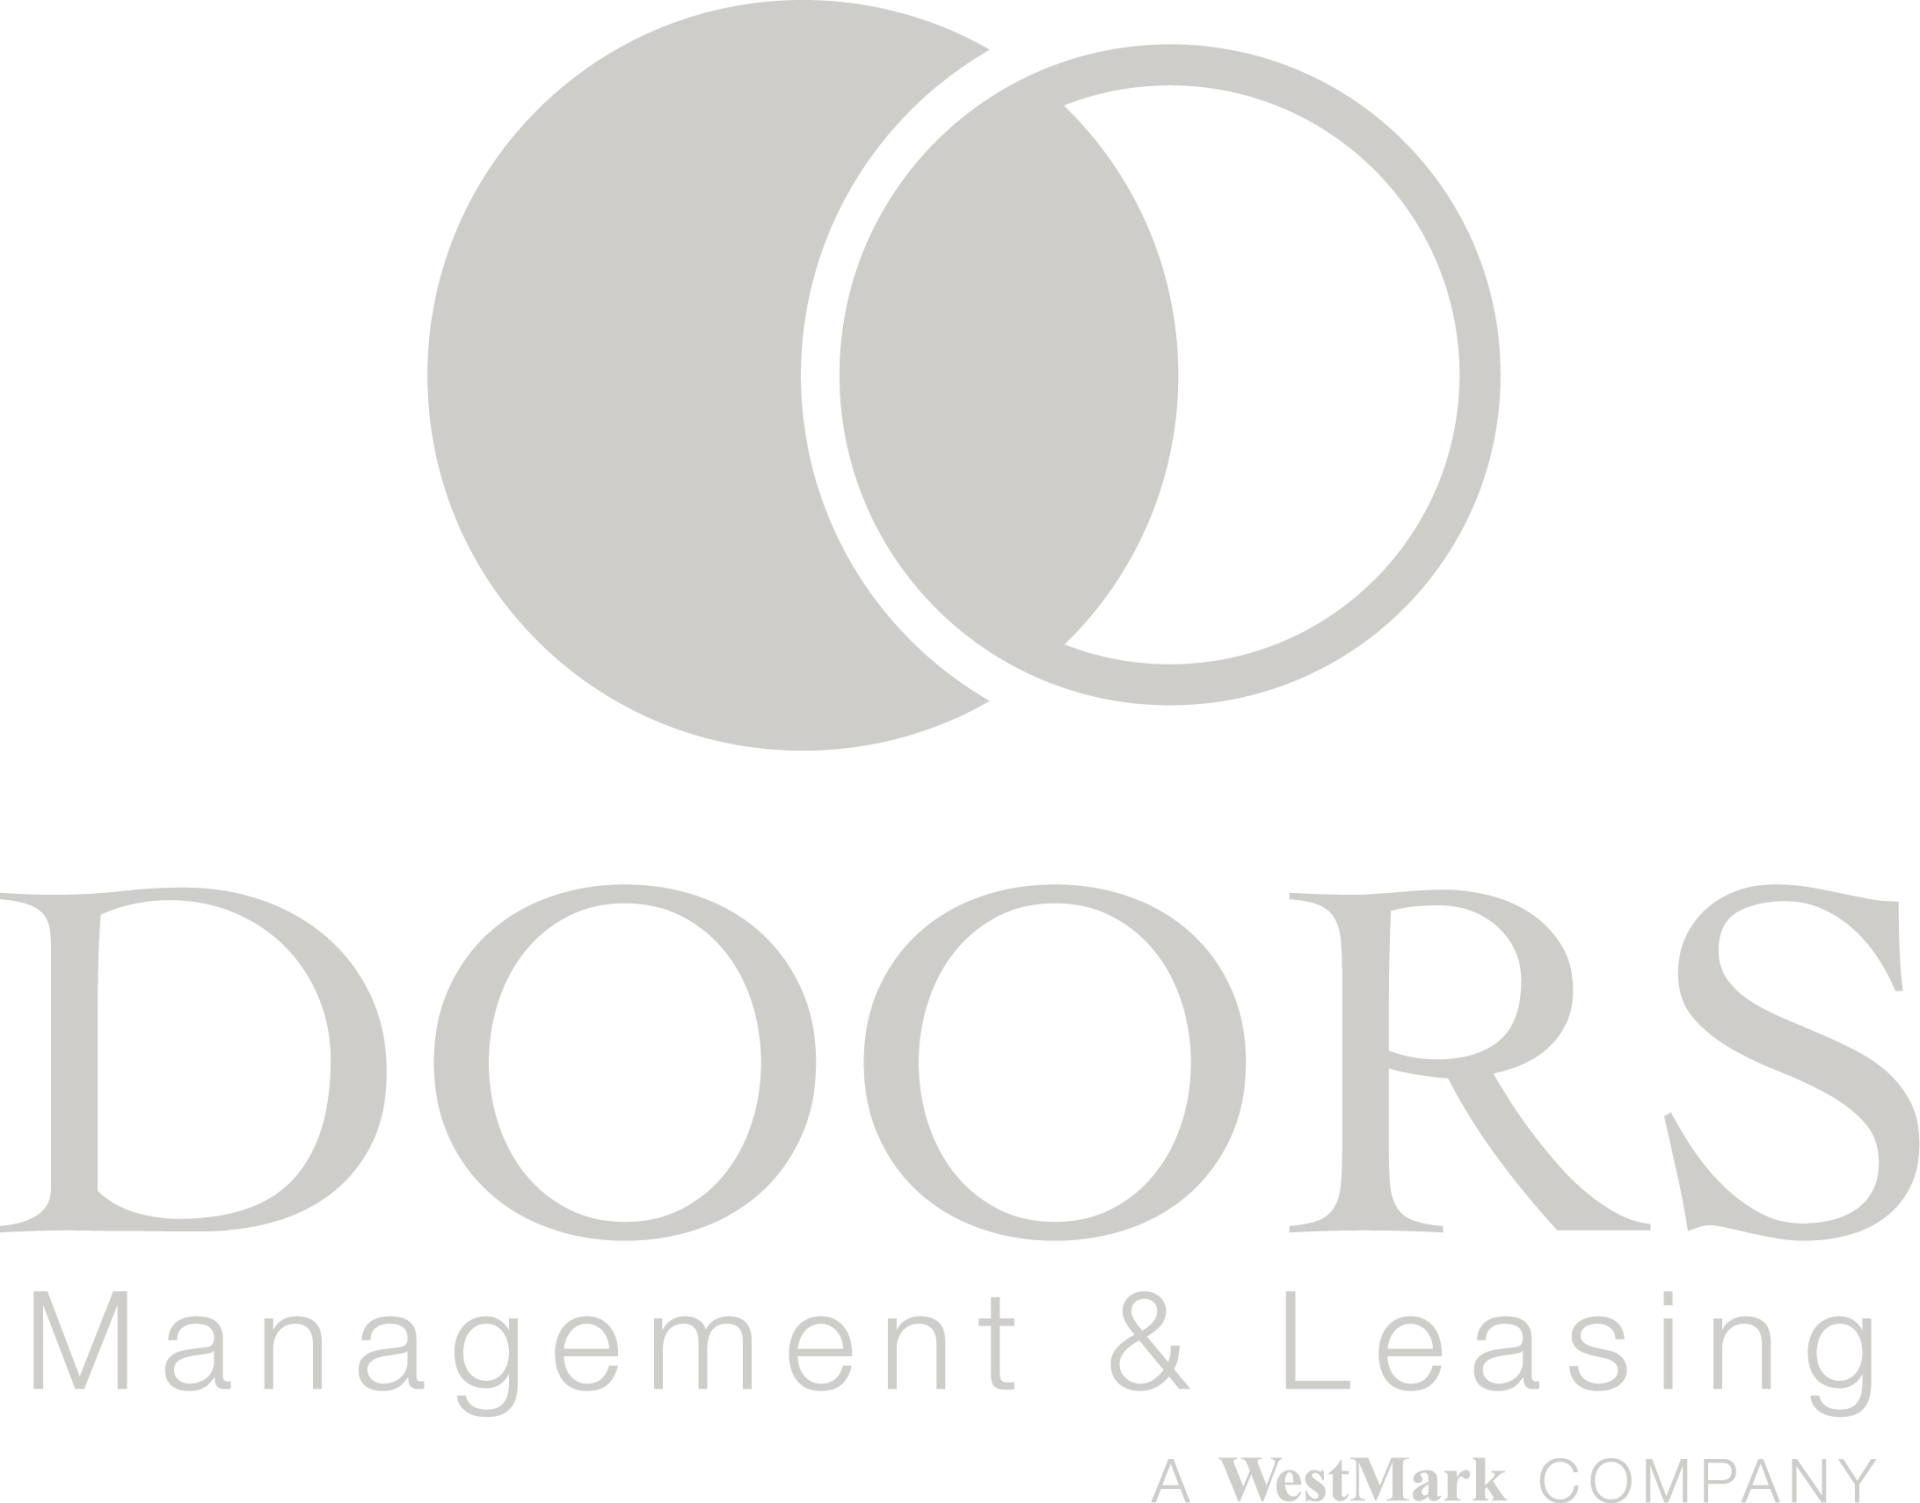 Doors Management & Leasing logo in footer linked to home page